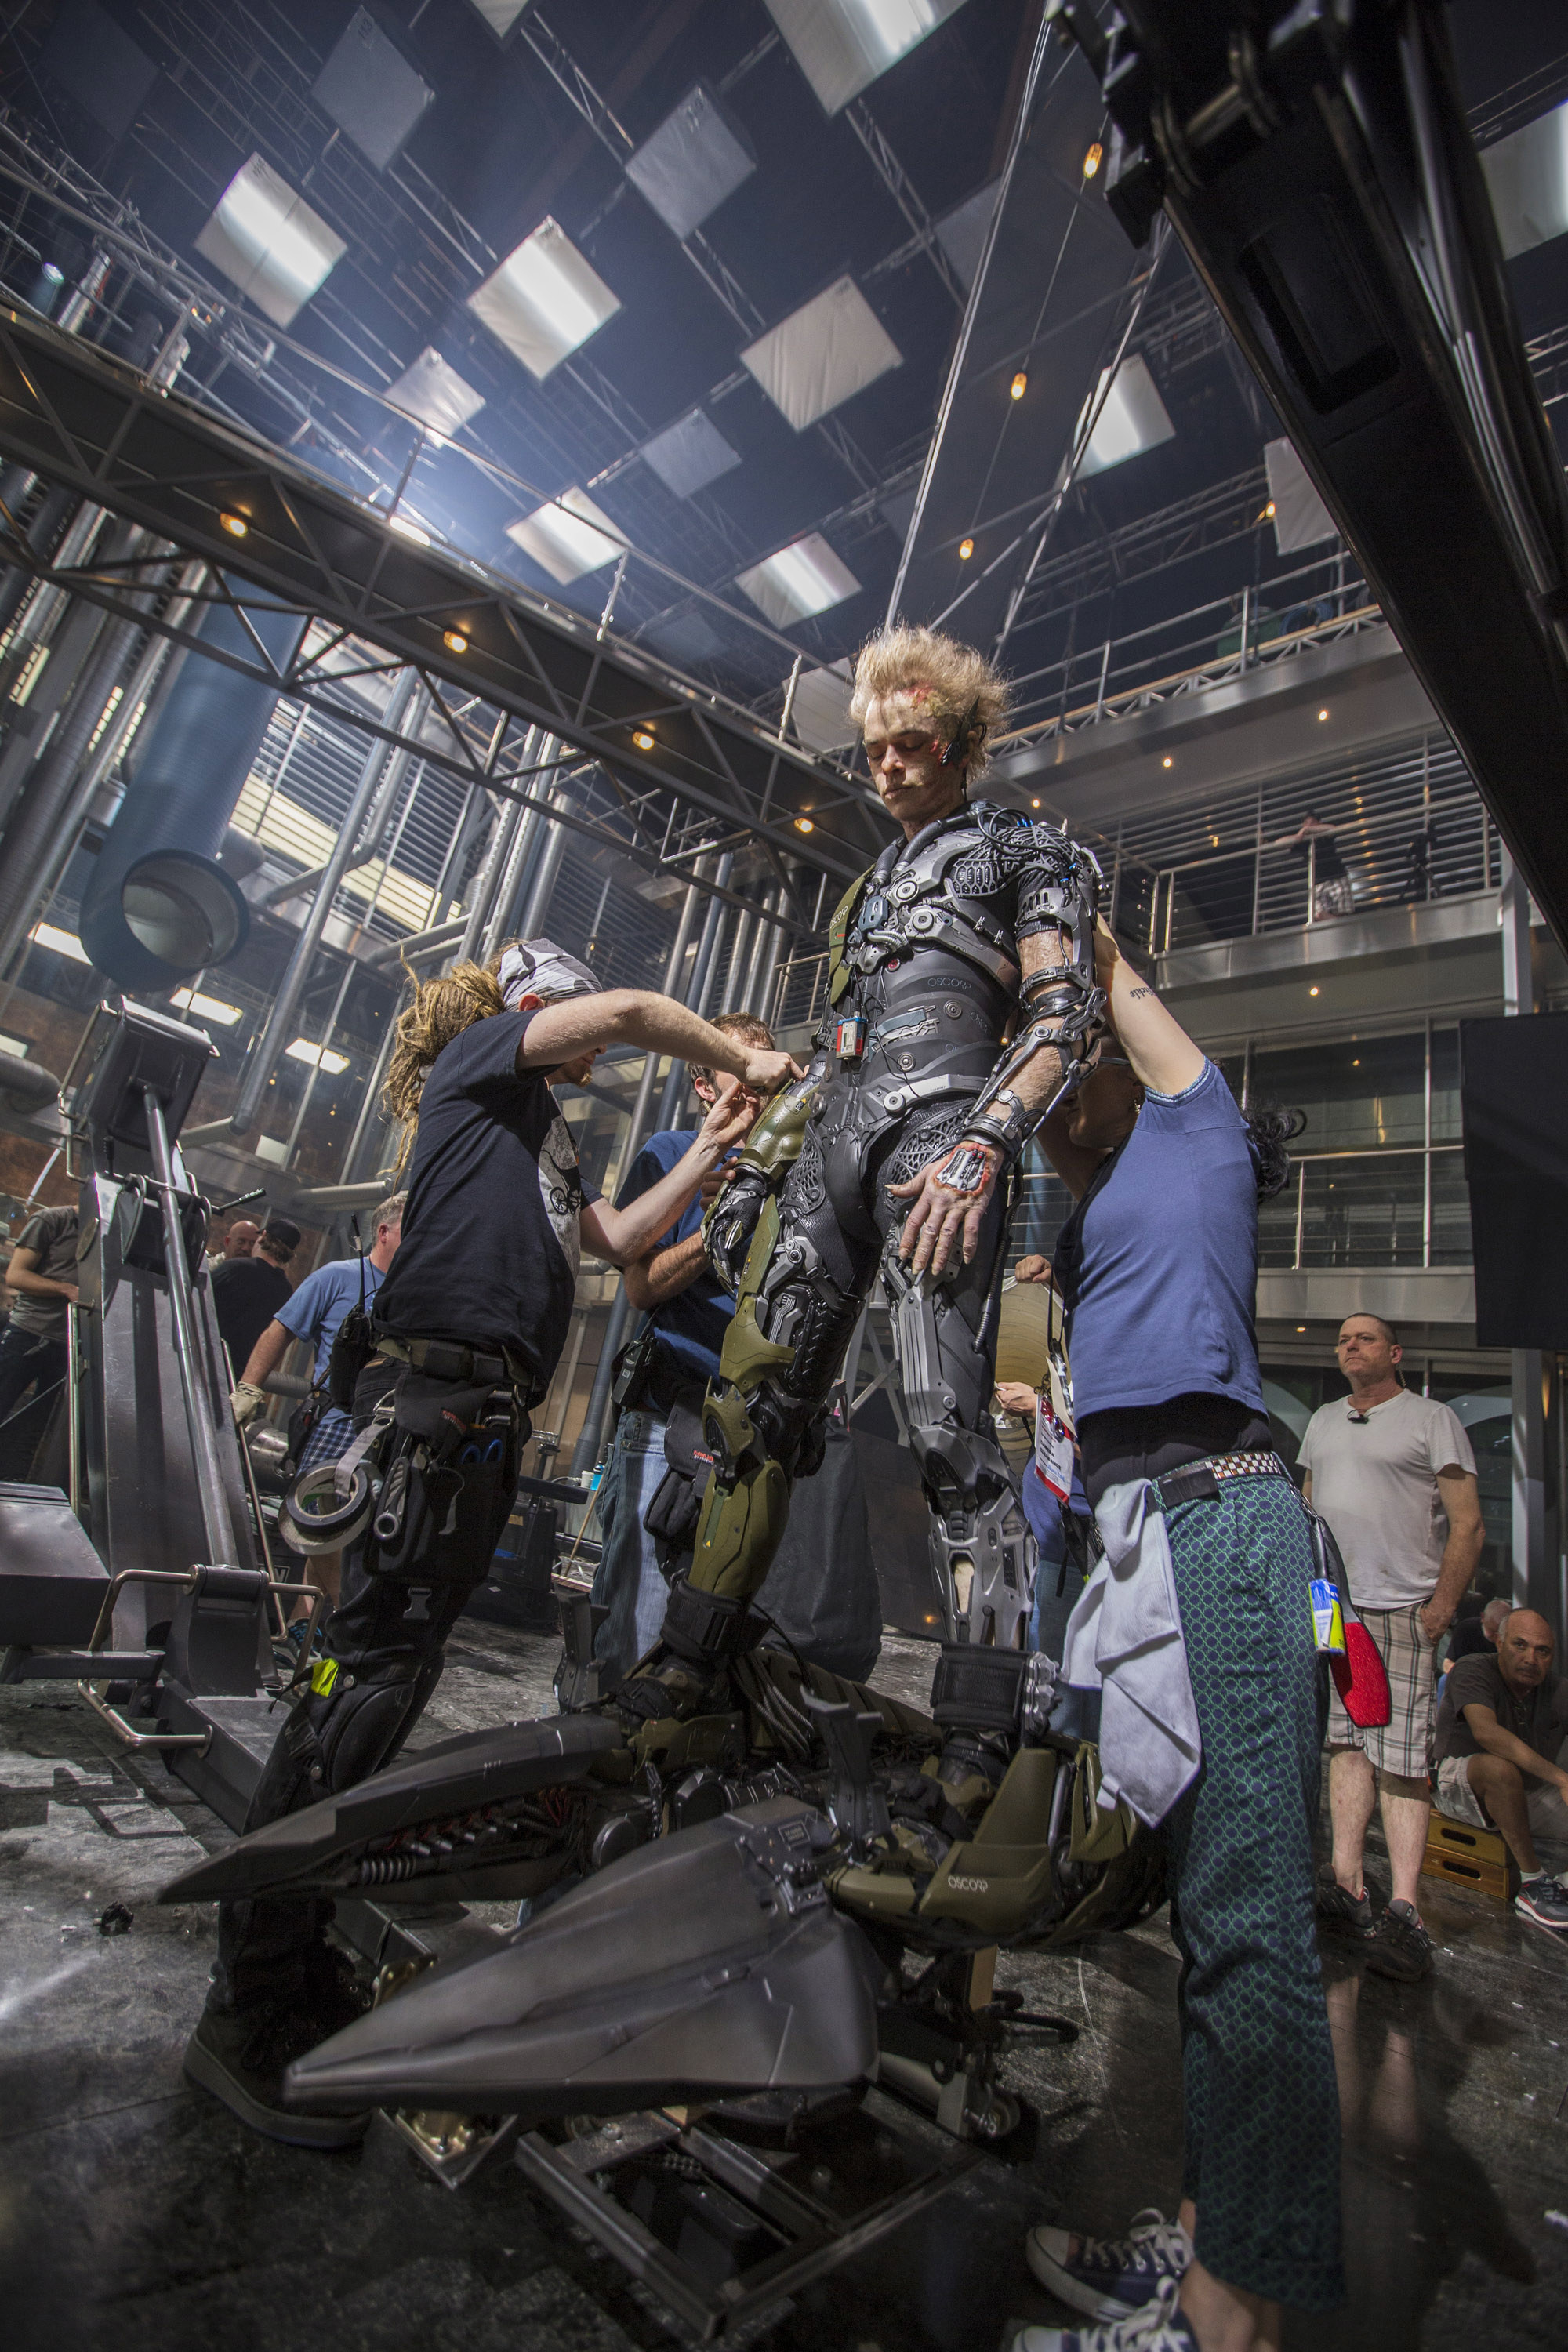 DeHaan being put into his costume on set